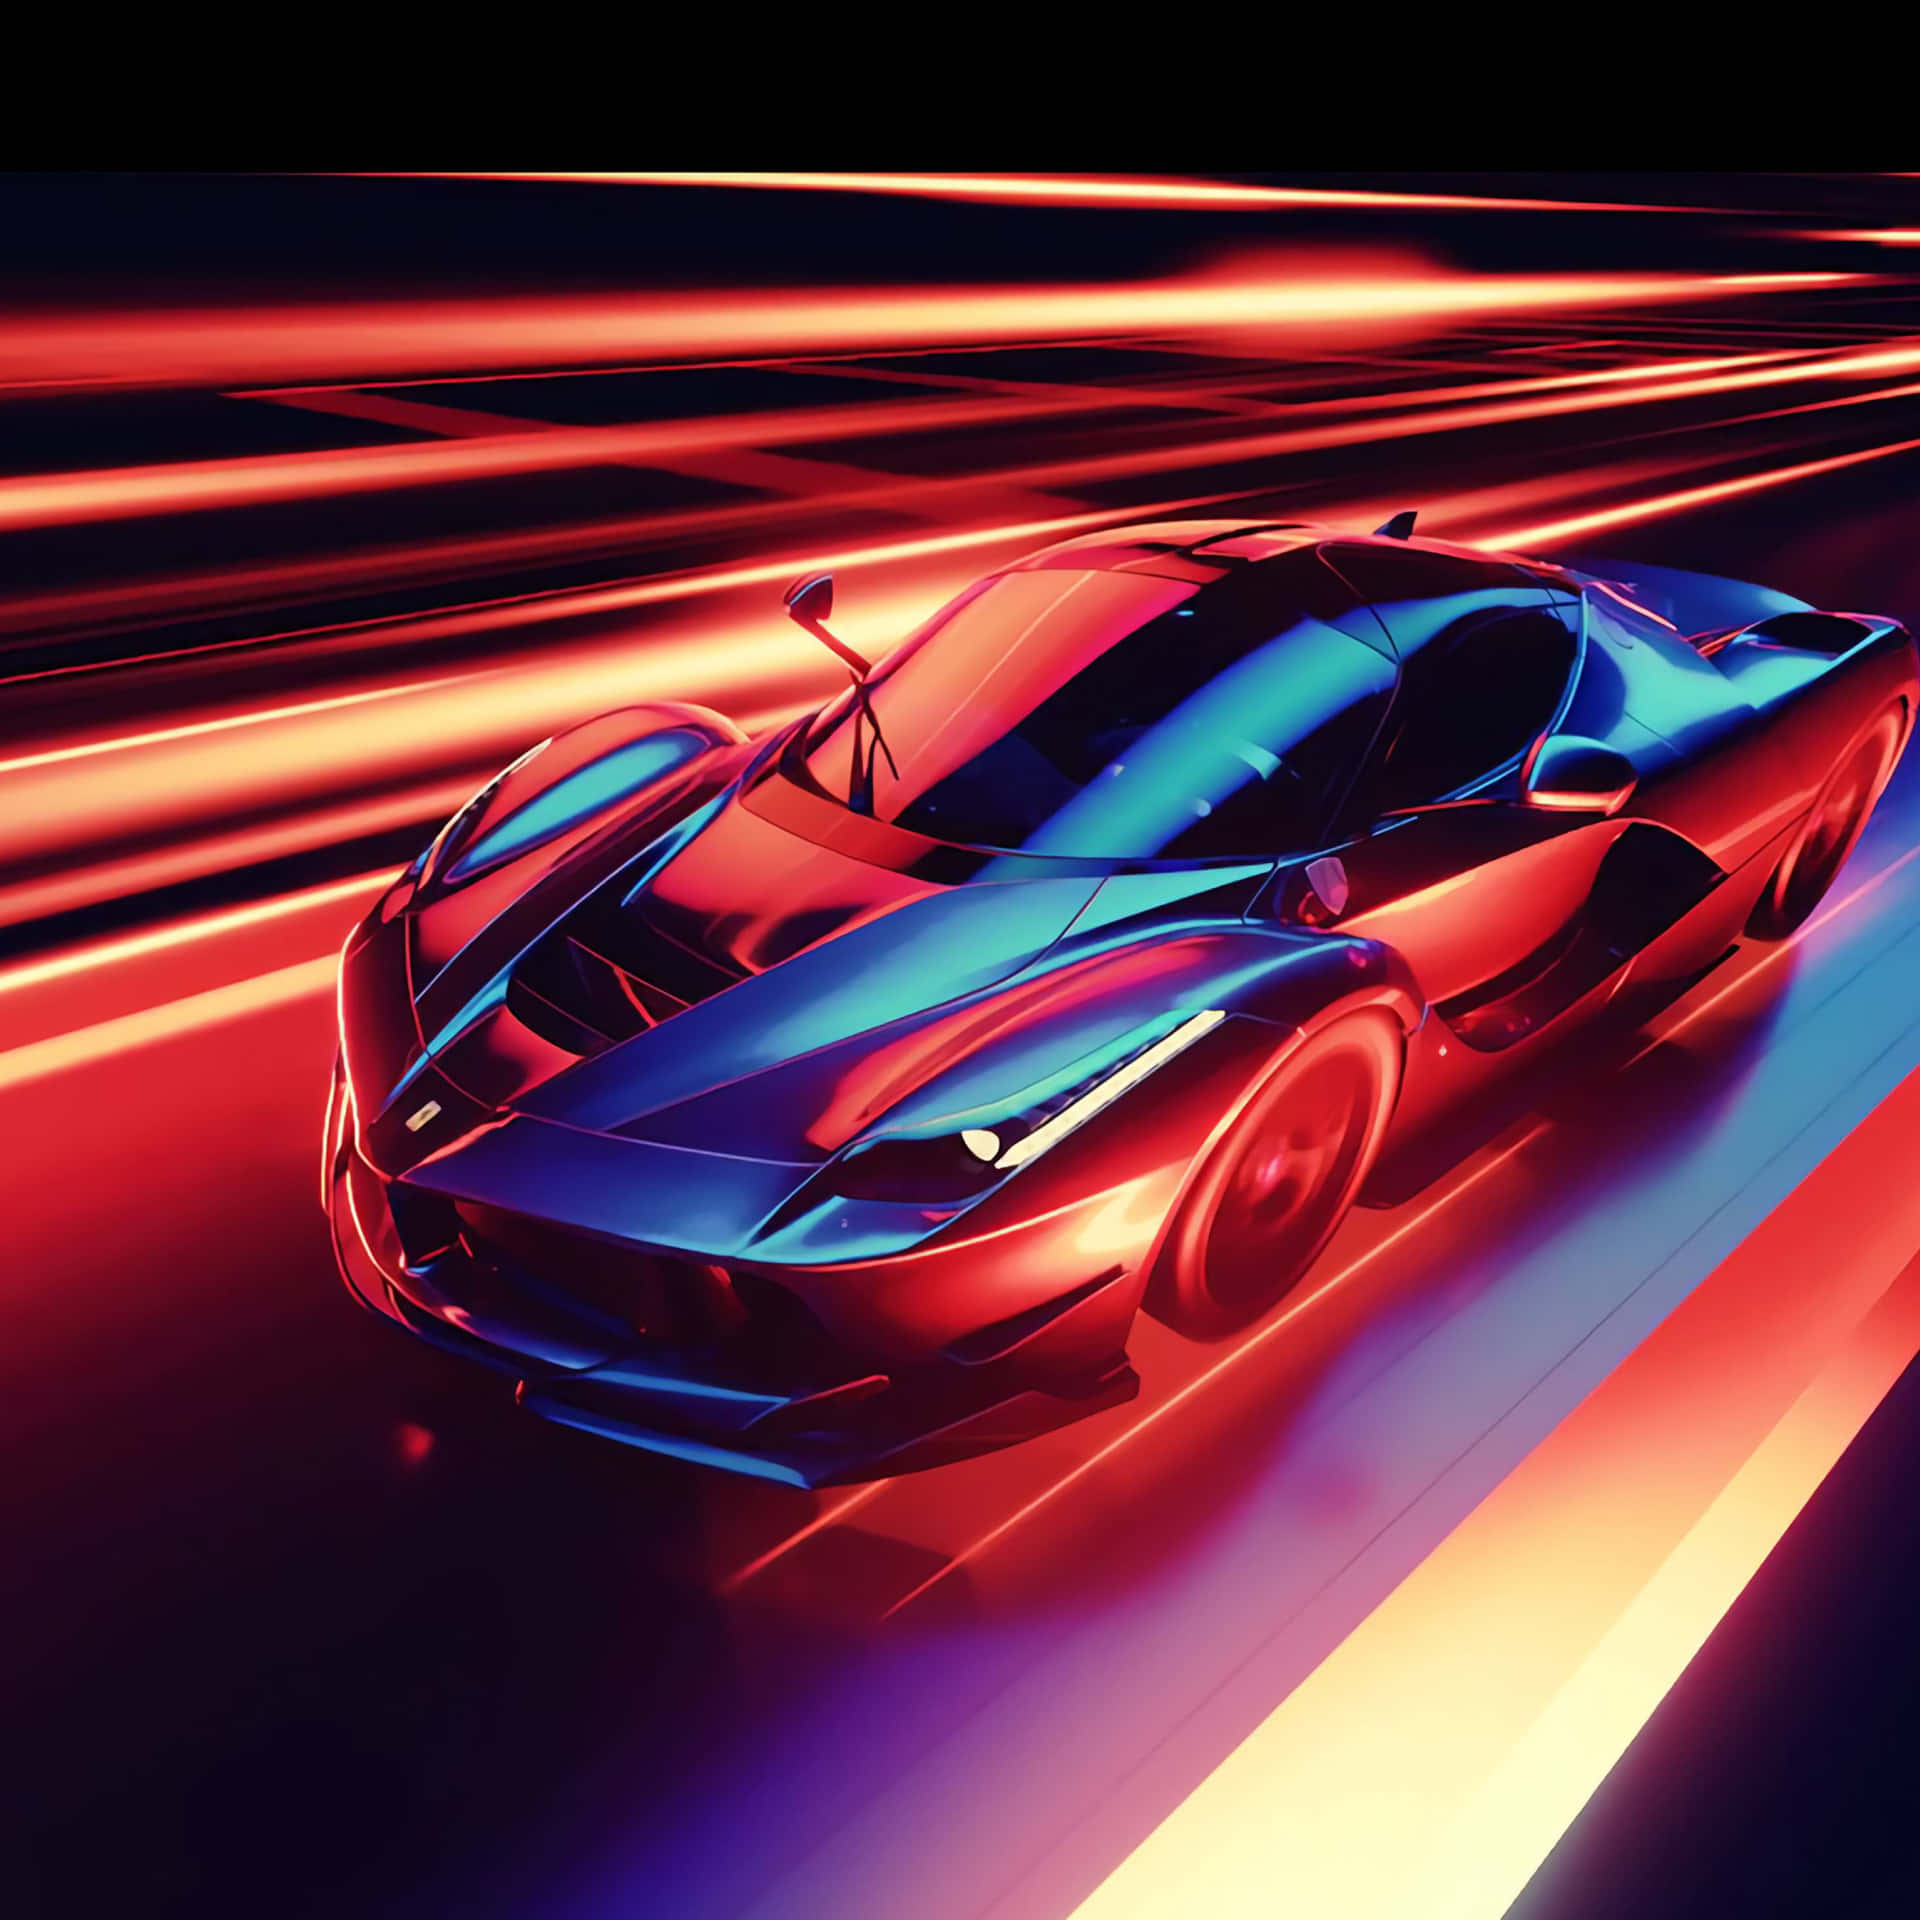 "Speed Up Your Life in a Cool Ferrari Car" Wallpaper